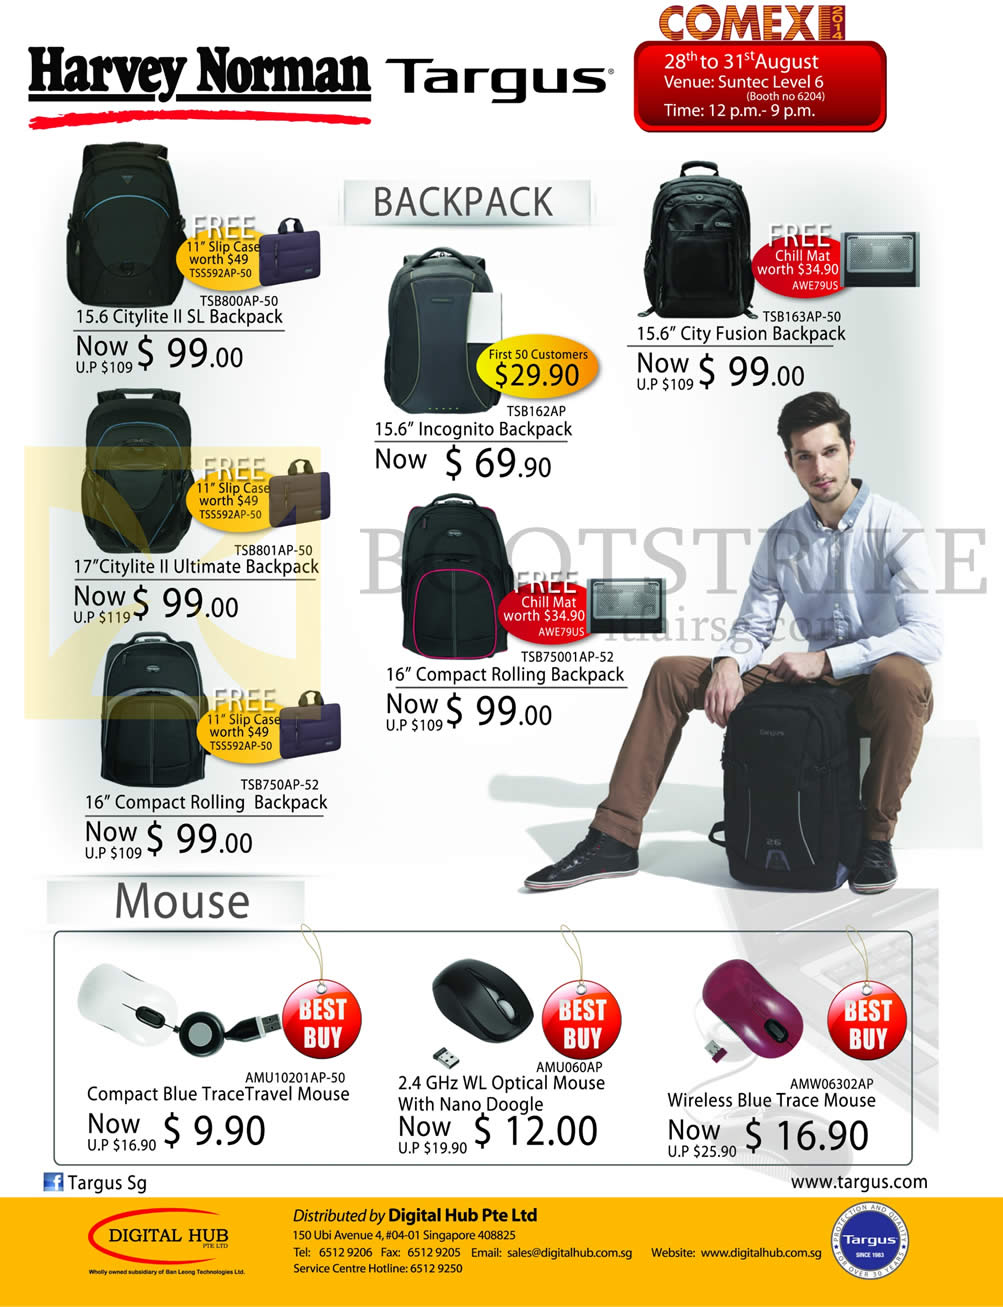 COMEX 2014 price list image brochure of Harvey Norman Targus Mouse, Backpacks Citylite II SL, Ultimate, Compact Rolling, City Fusion, Incognito, Compact BlueTrace, Wireless BlueTrace